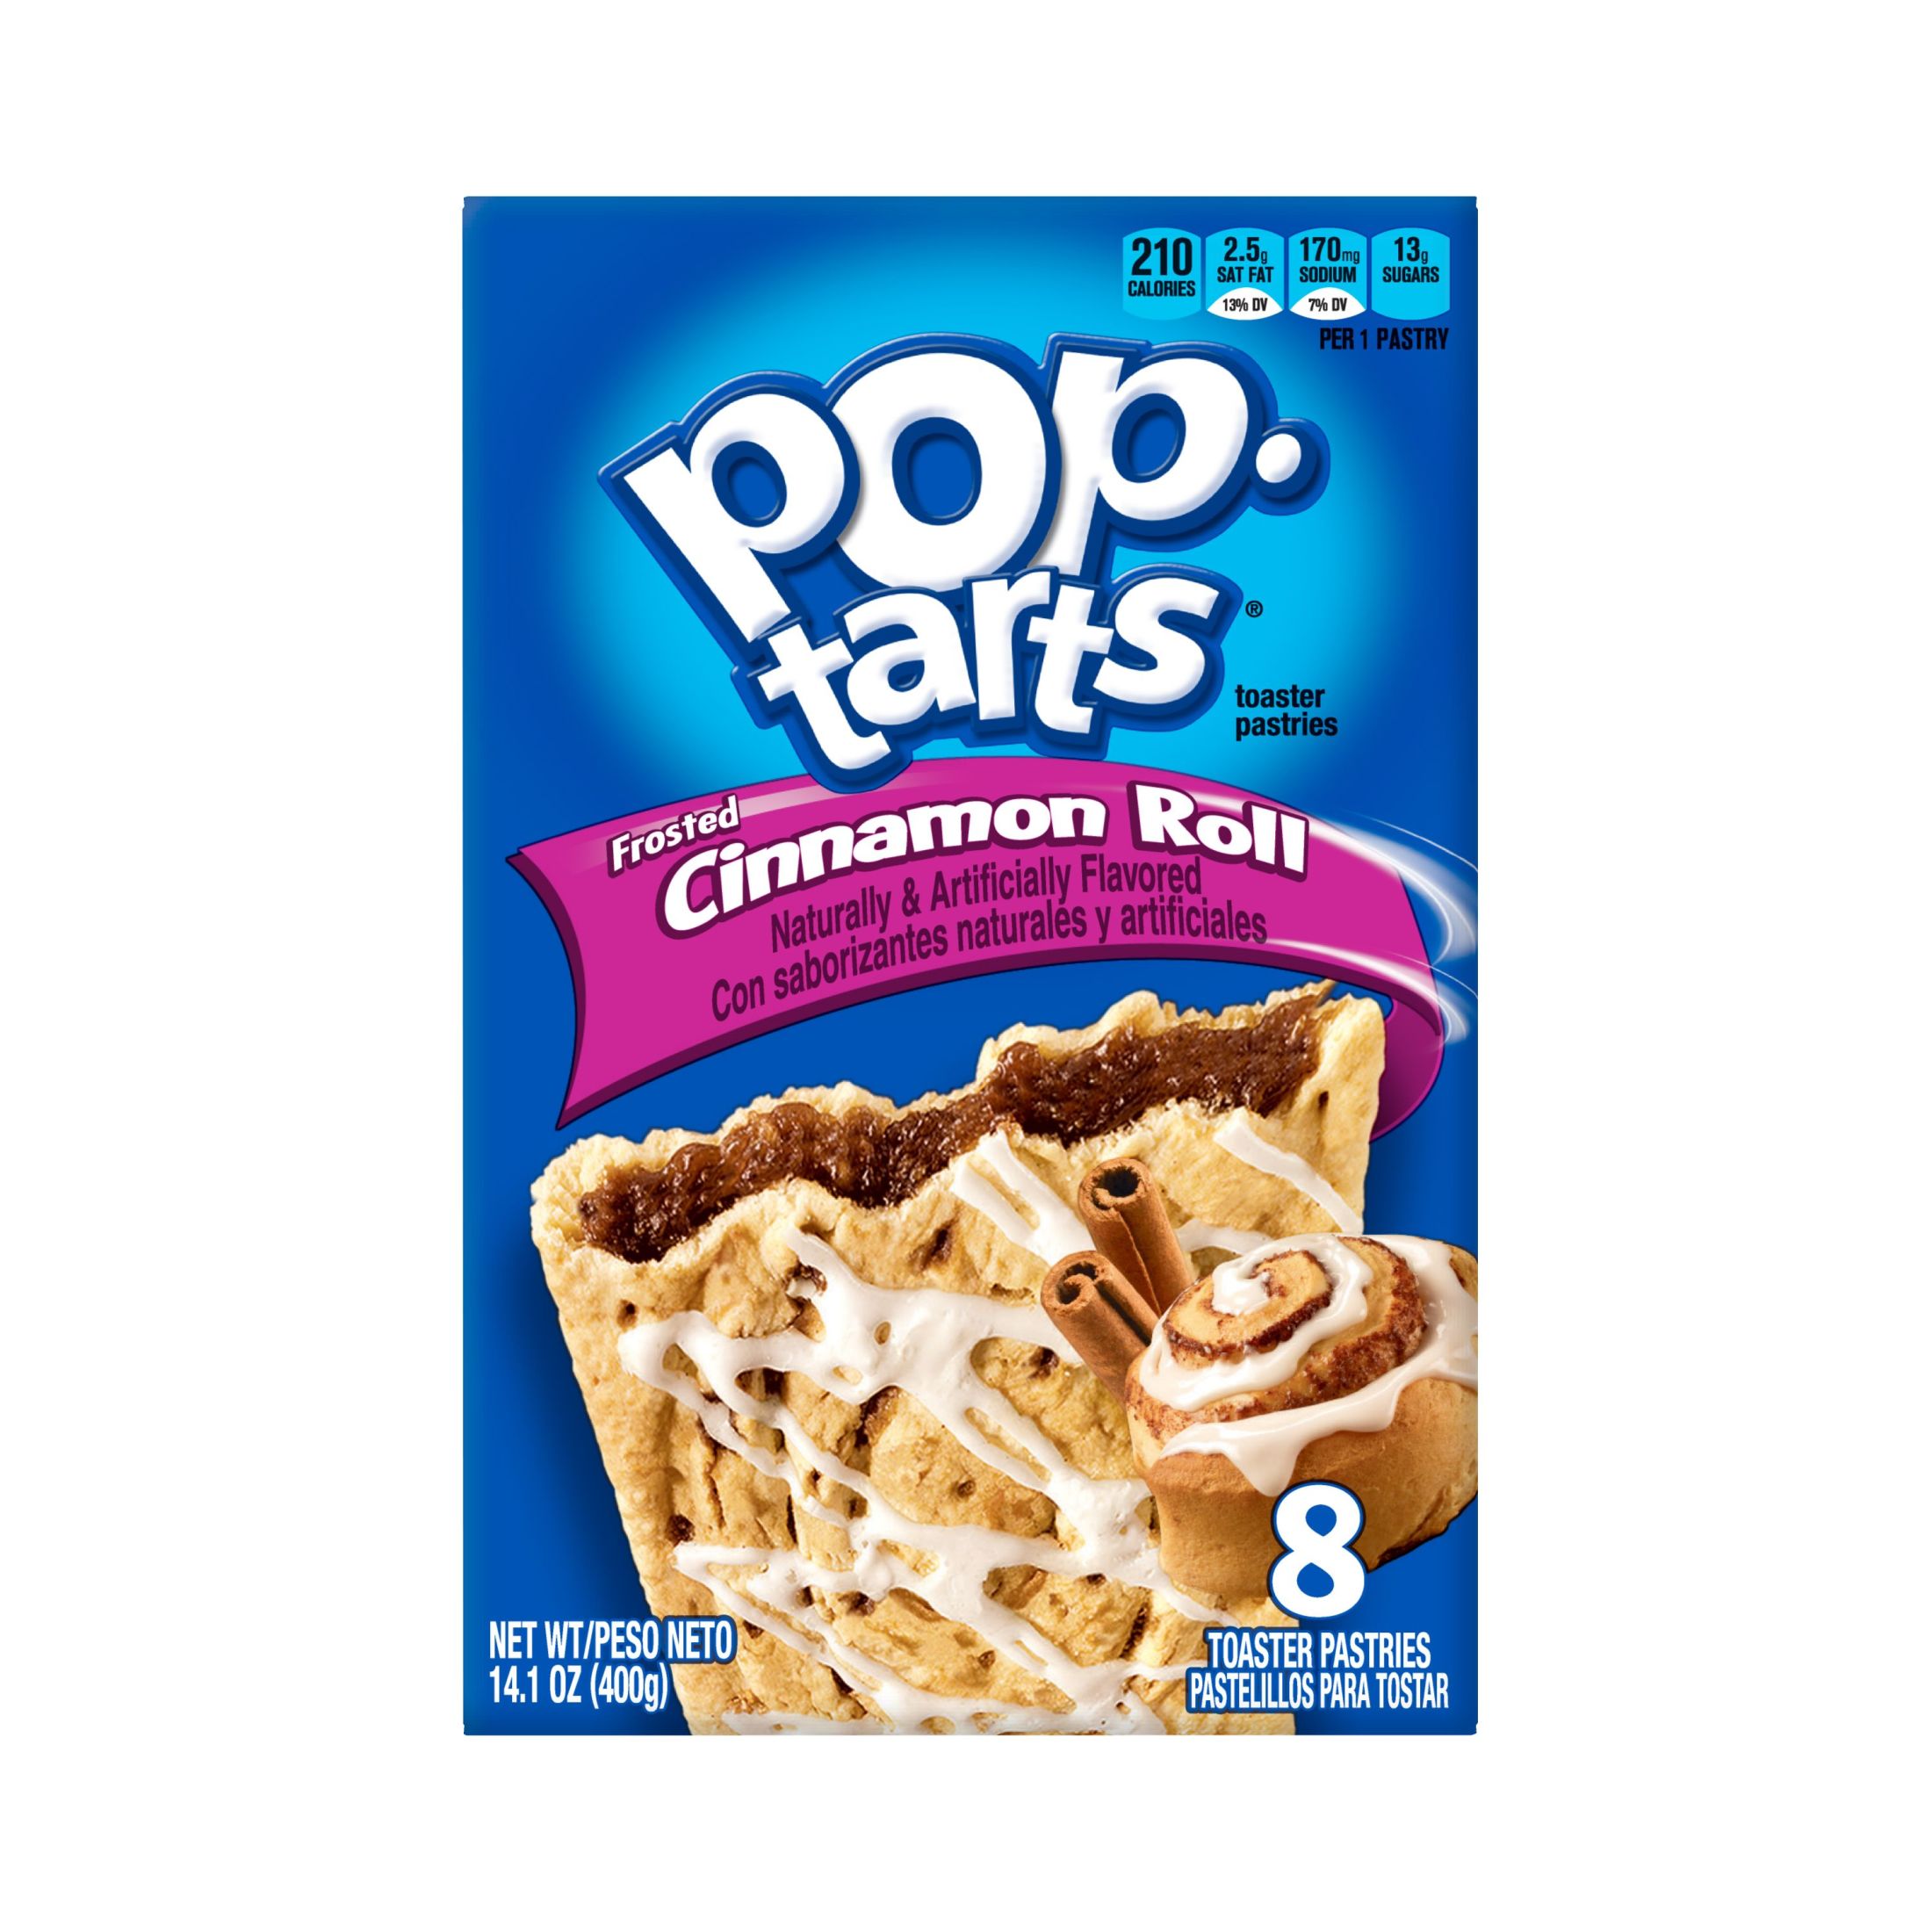 Pop-Tarts Frosted Cinnamon Roll Breakfast Toaster Pastries, 14.1 oz, 8 Count - image 1 of 9